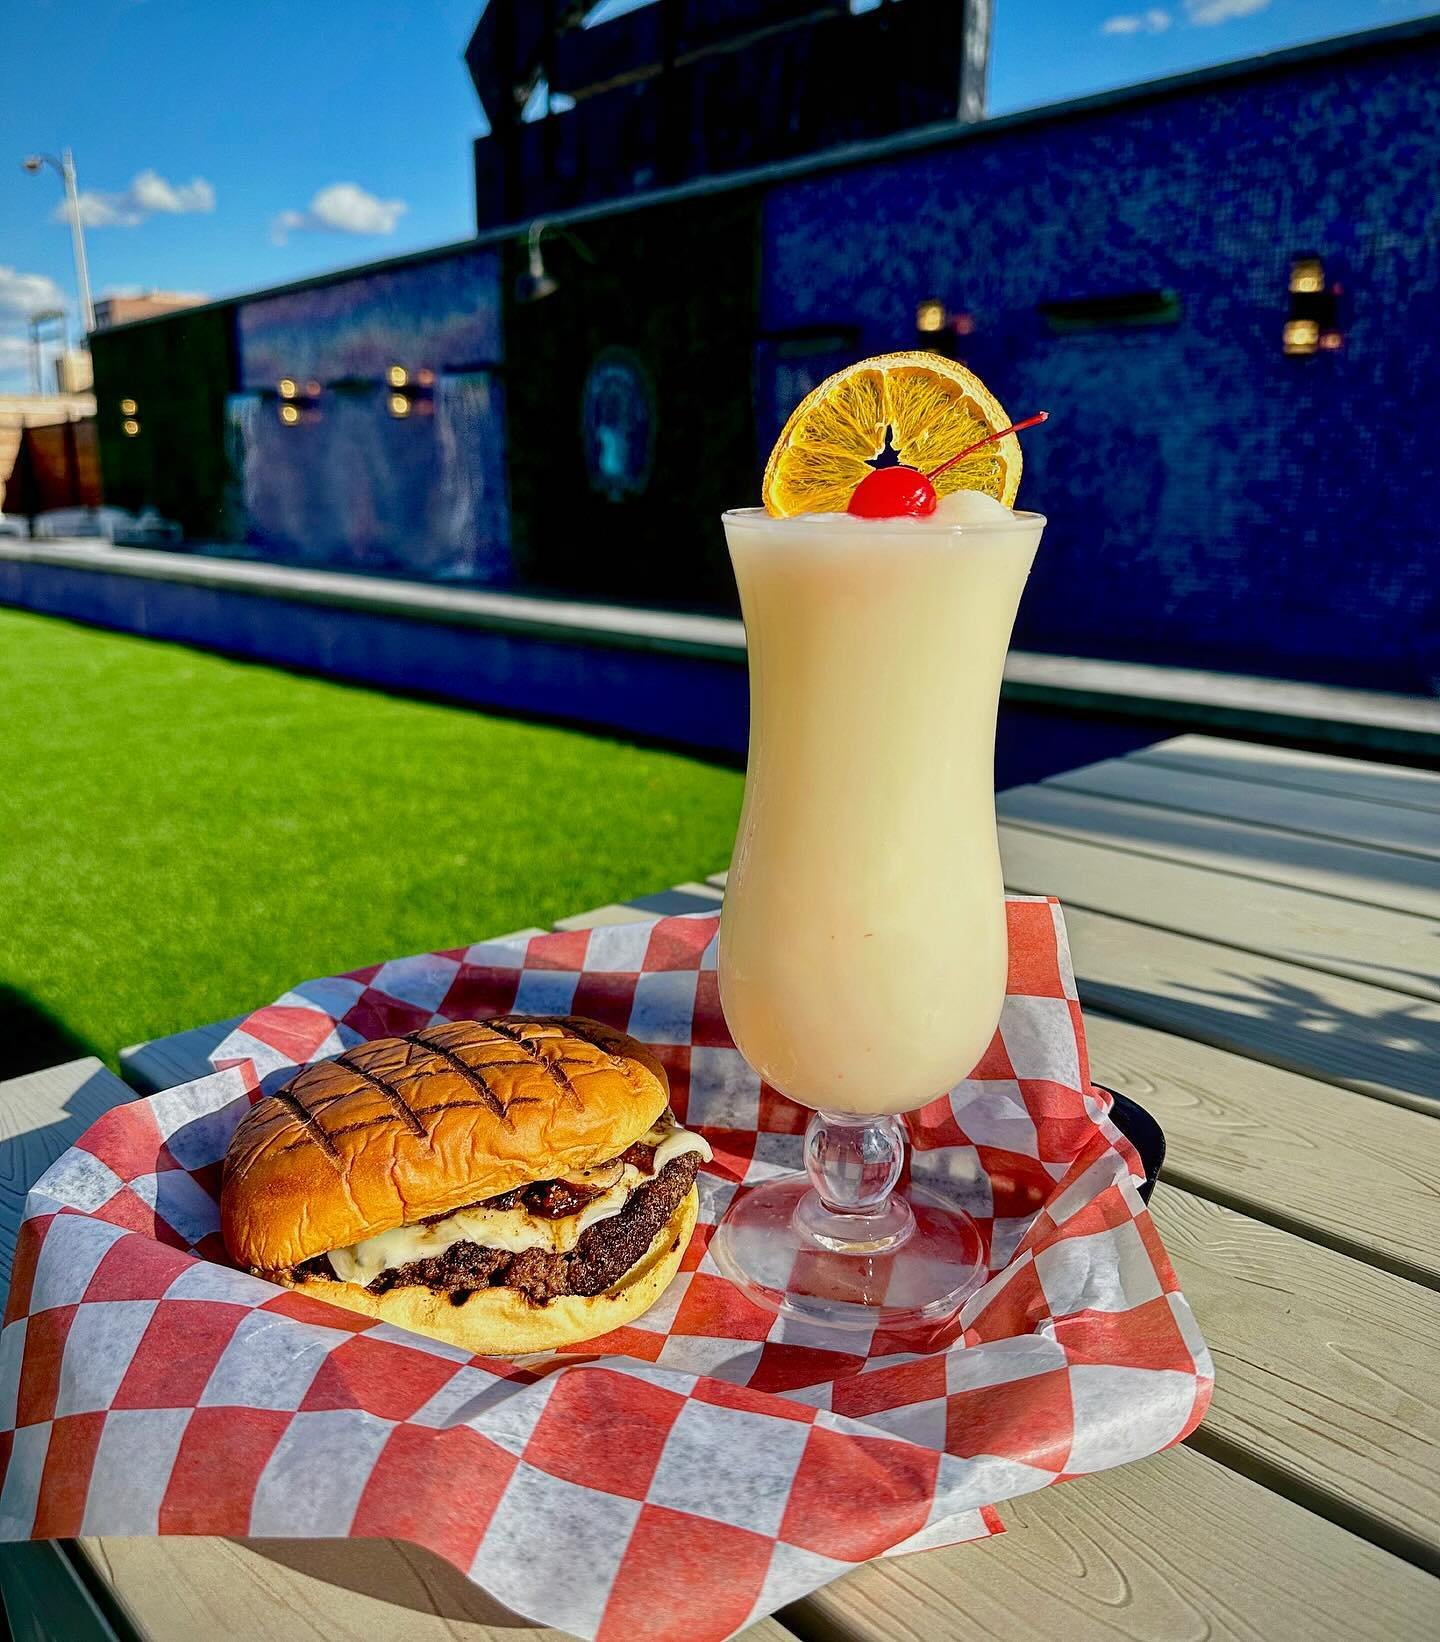 Juicy burger by Matera Grill paired with a tropical Pina Colada? Sign us up! 🍔🌴🍹 

Wed &amp; Thurs 5pm to 12am
Fri &amp; Sat 11am to 1am